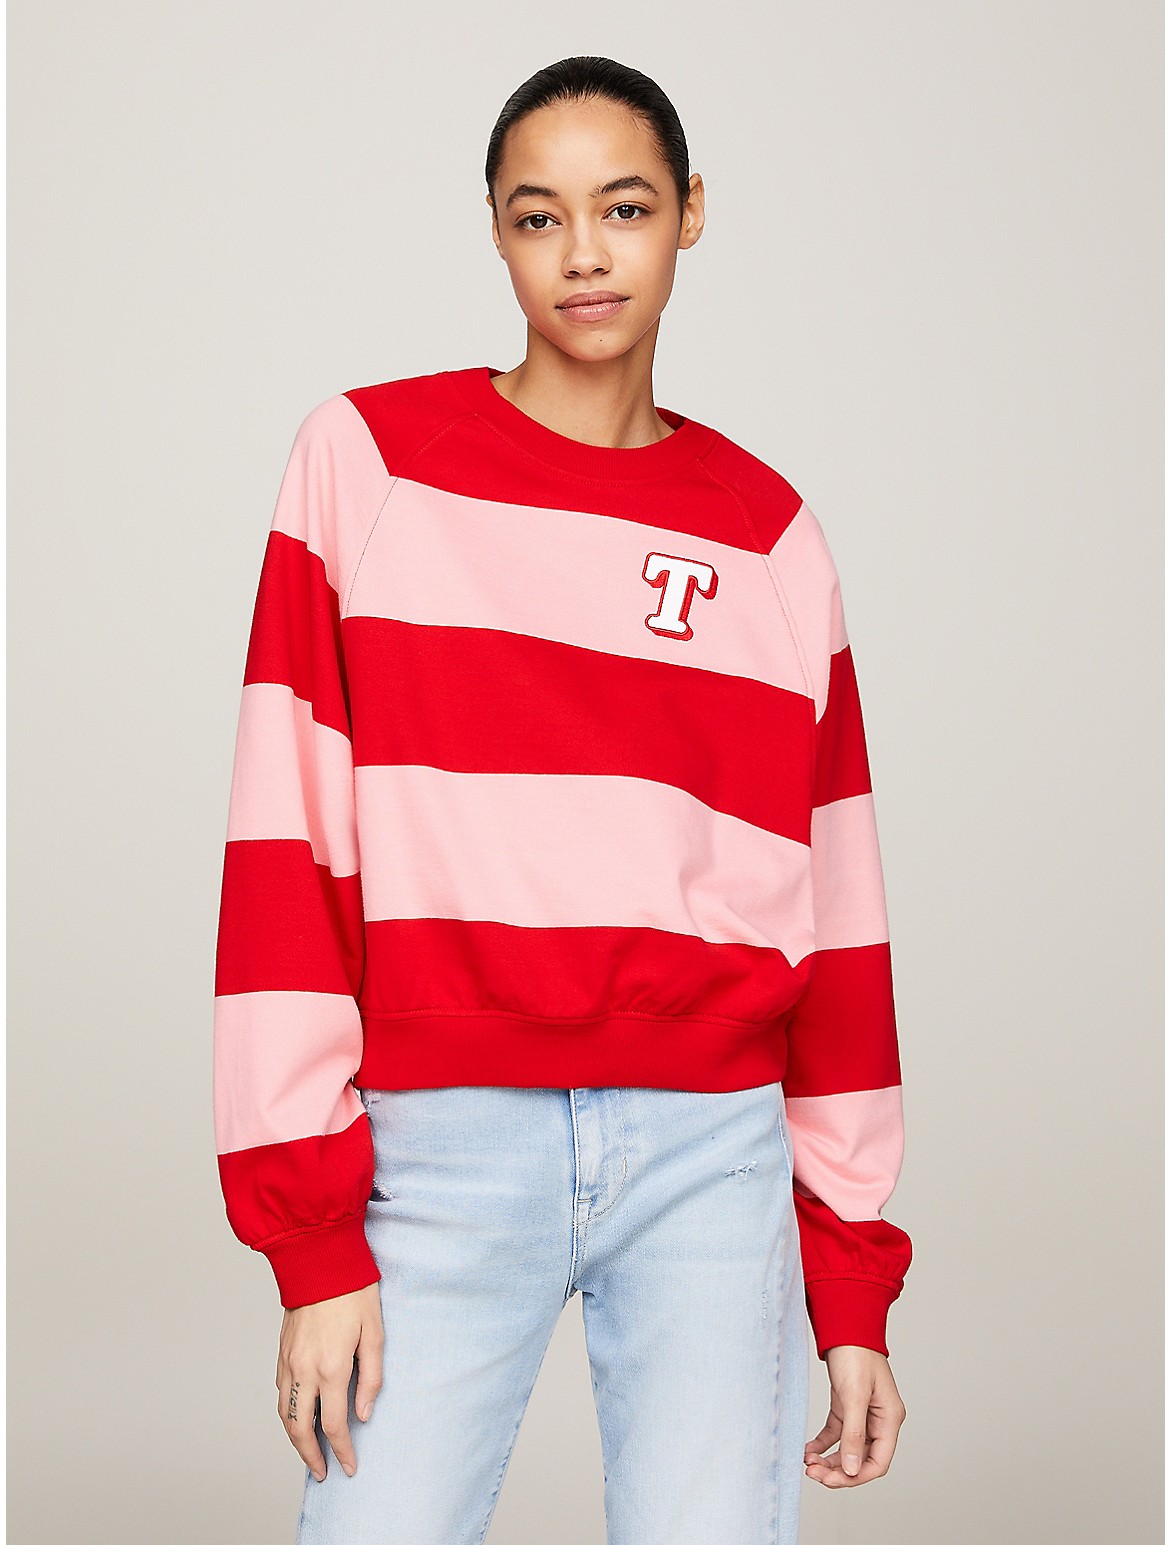 Tommy Hilfiger Women's Relaxed Fit Rugby Stripe Sweatshirt